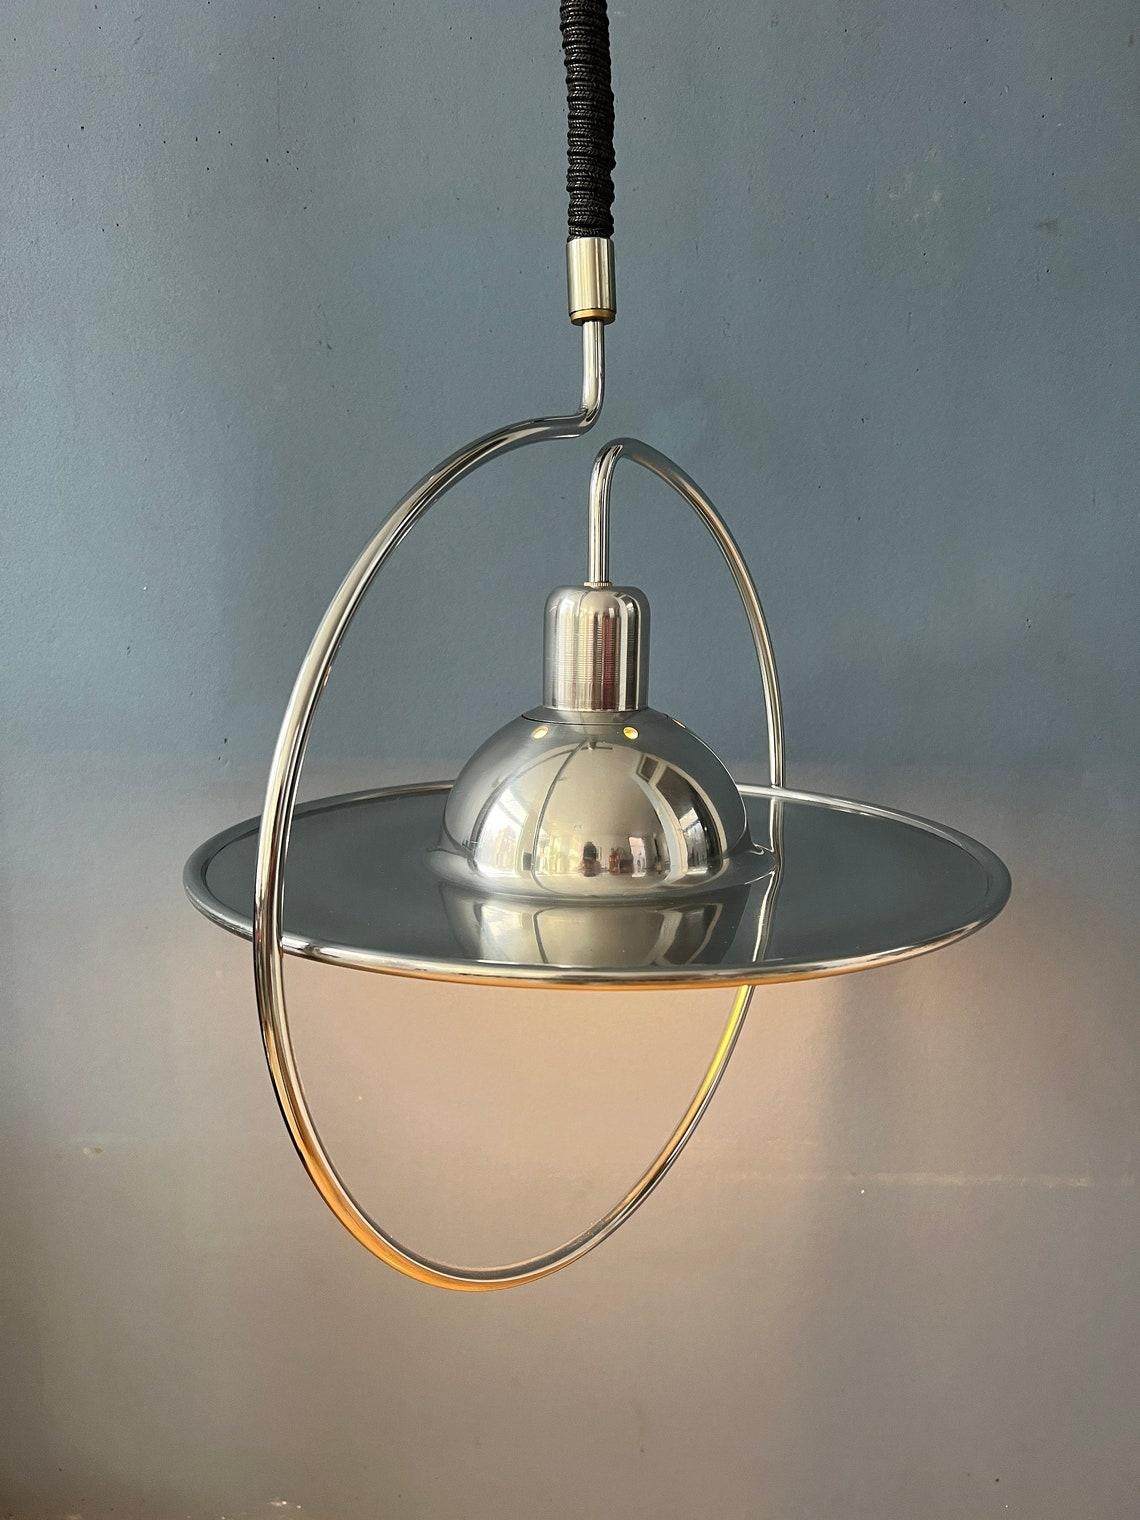 Mid century UFO pendant lamp with decorative chrome frame. The height of the lamp can easily be adjusted with the suspension mechanism. The lamp requires one E27/26 (standard) lightbulb.

Additional information:
Materials: Metal
Period: